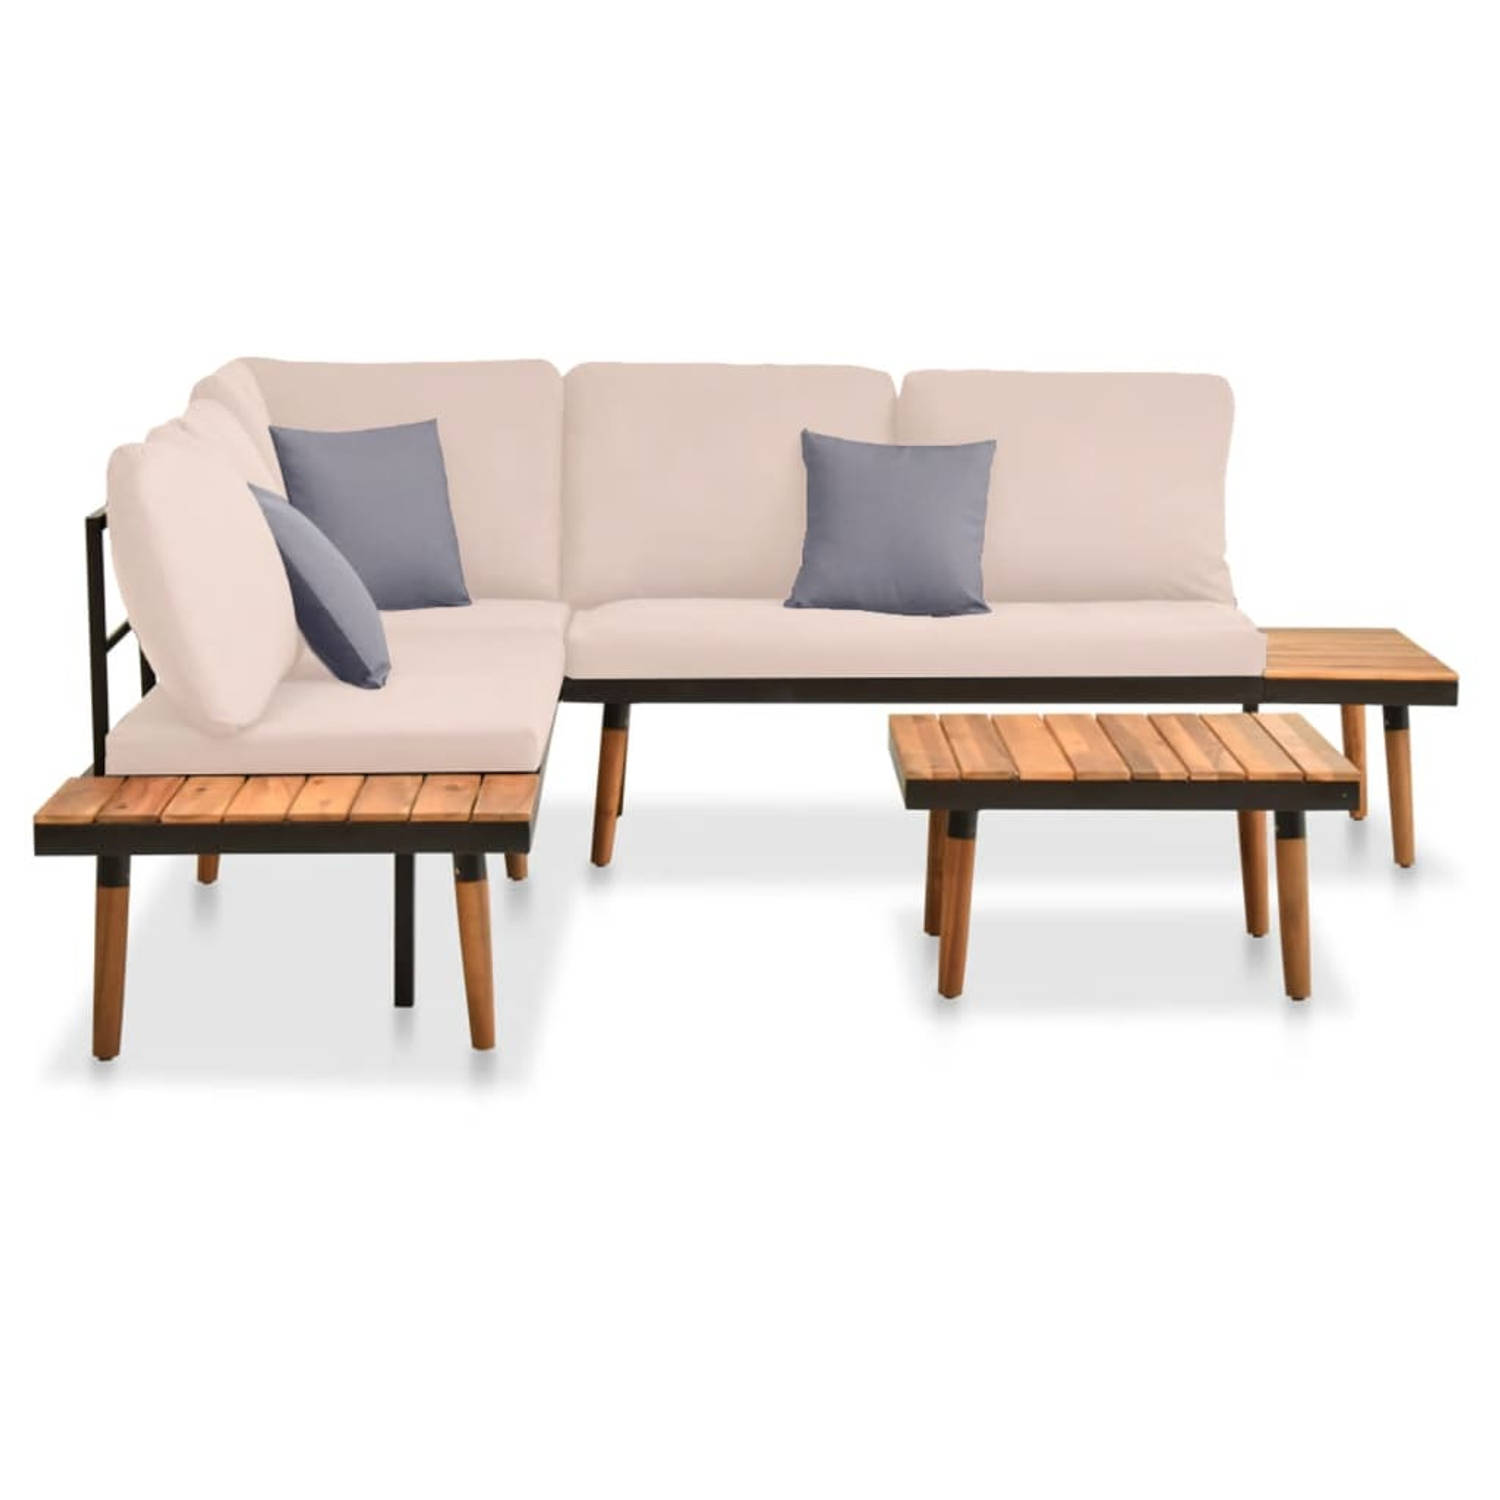 The Living Store 4-delige Loungeset met kussens massief acaciahout - Tuinset